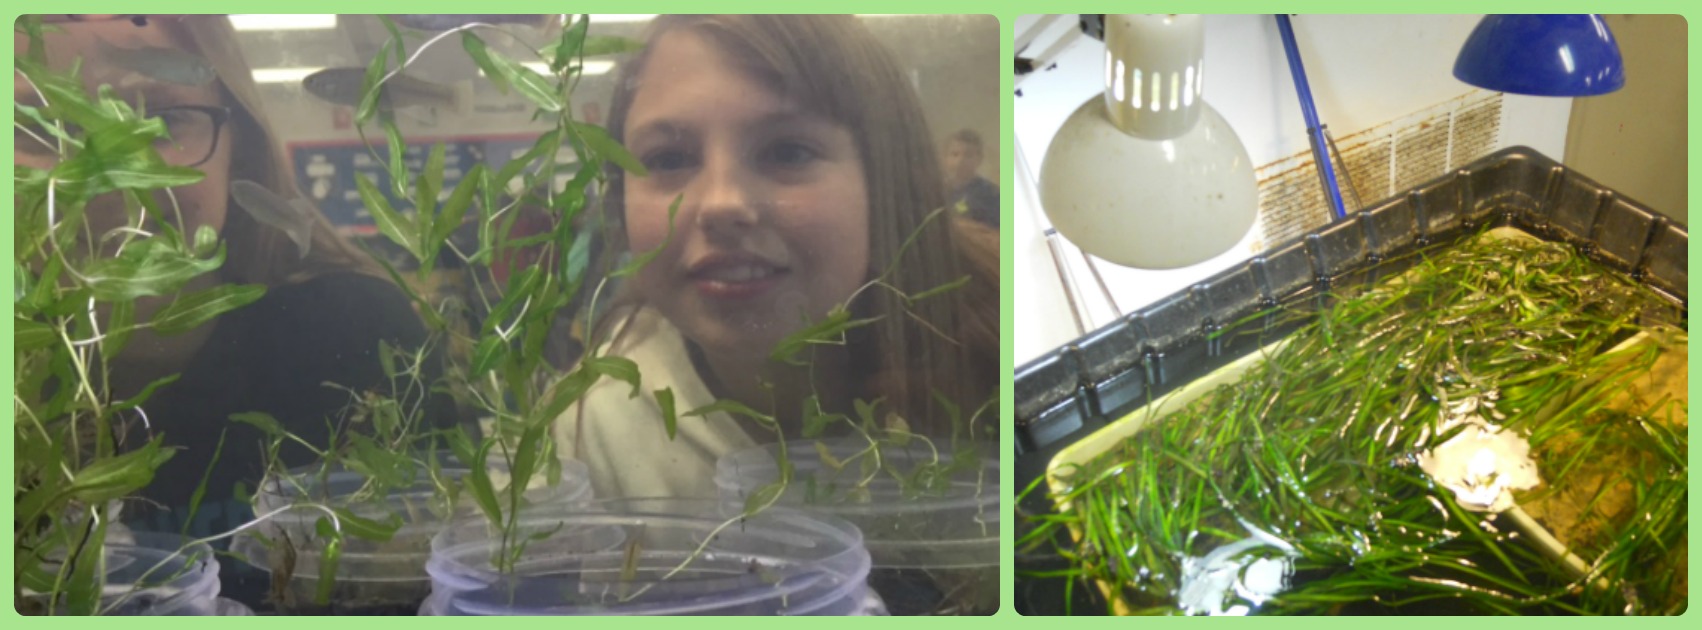 A student looking at an underwater grass growing in a tank.